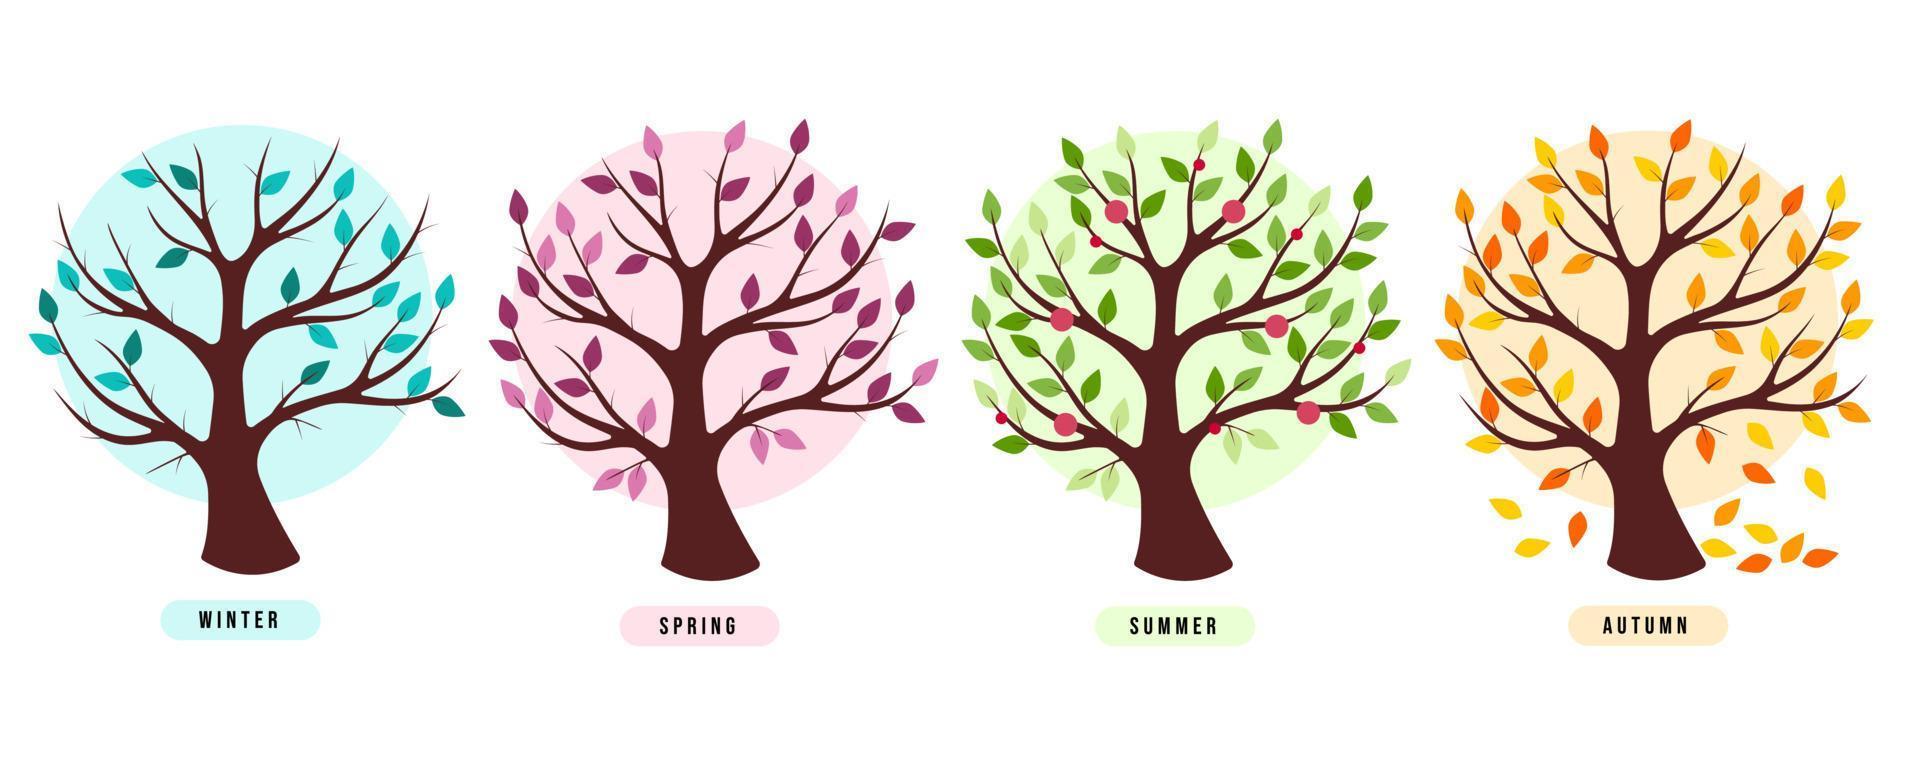 Four trees according to the seasons with title - winter, spring, summer, autumn. Inscriptions with the names of the season. Background on each tree in shades of leaves vector